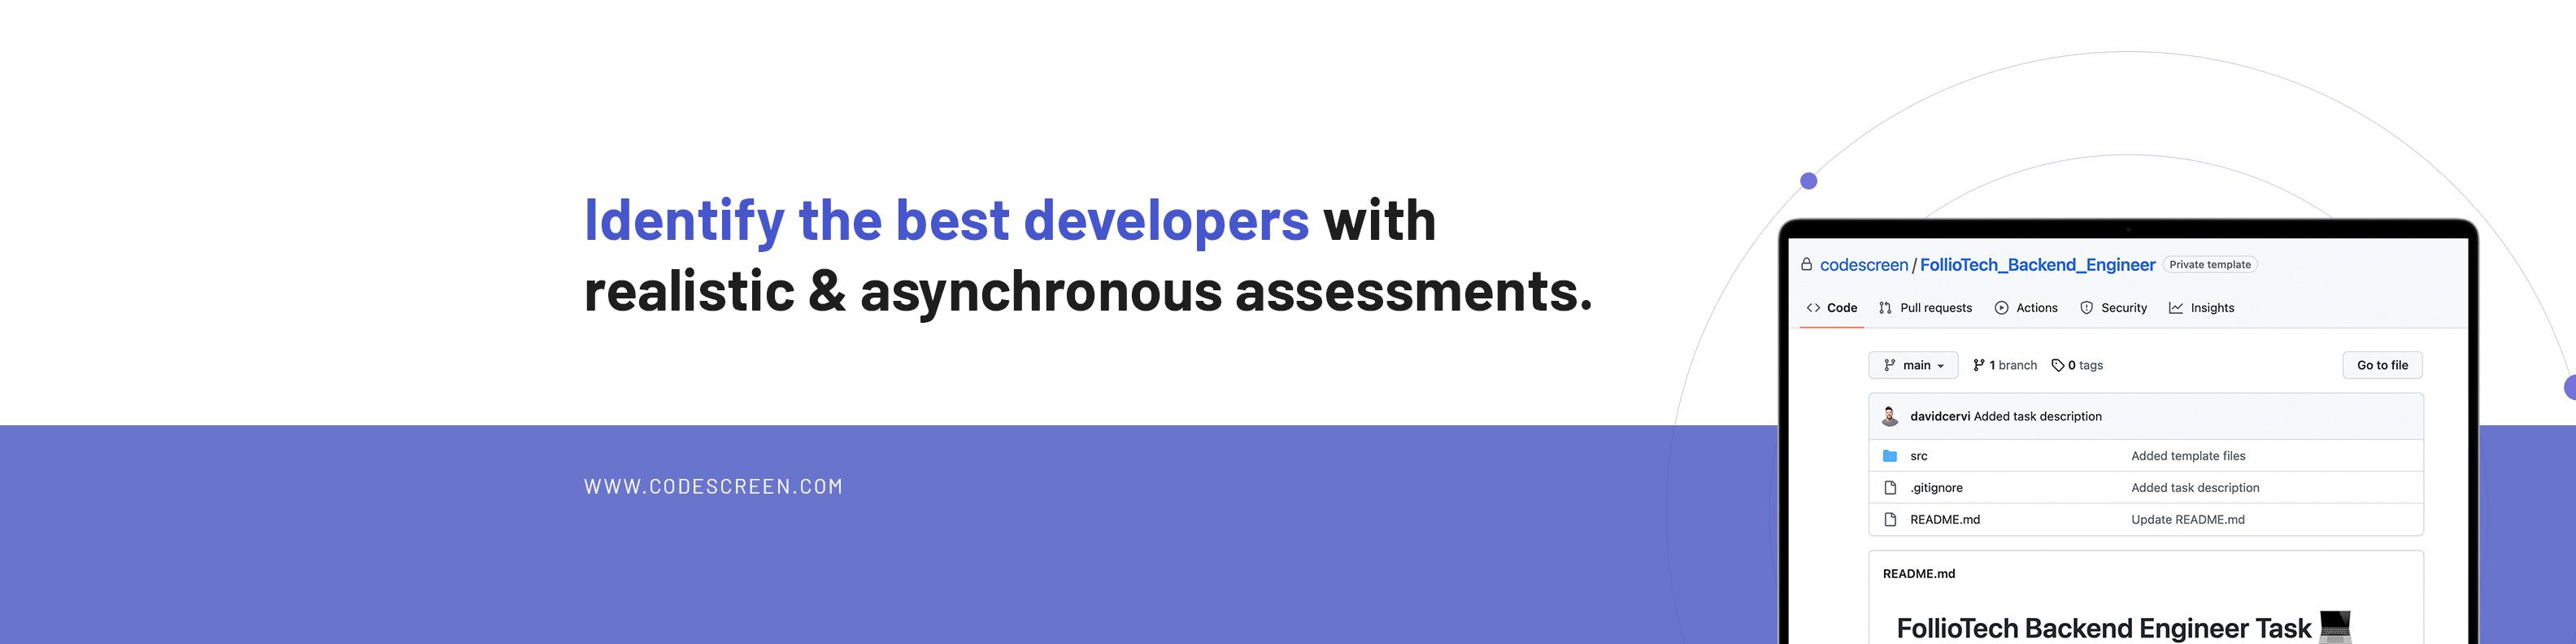 Review CodeScreen: Identify the best developers with assessments. - Appvizer